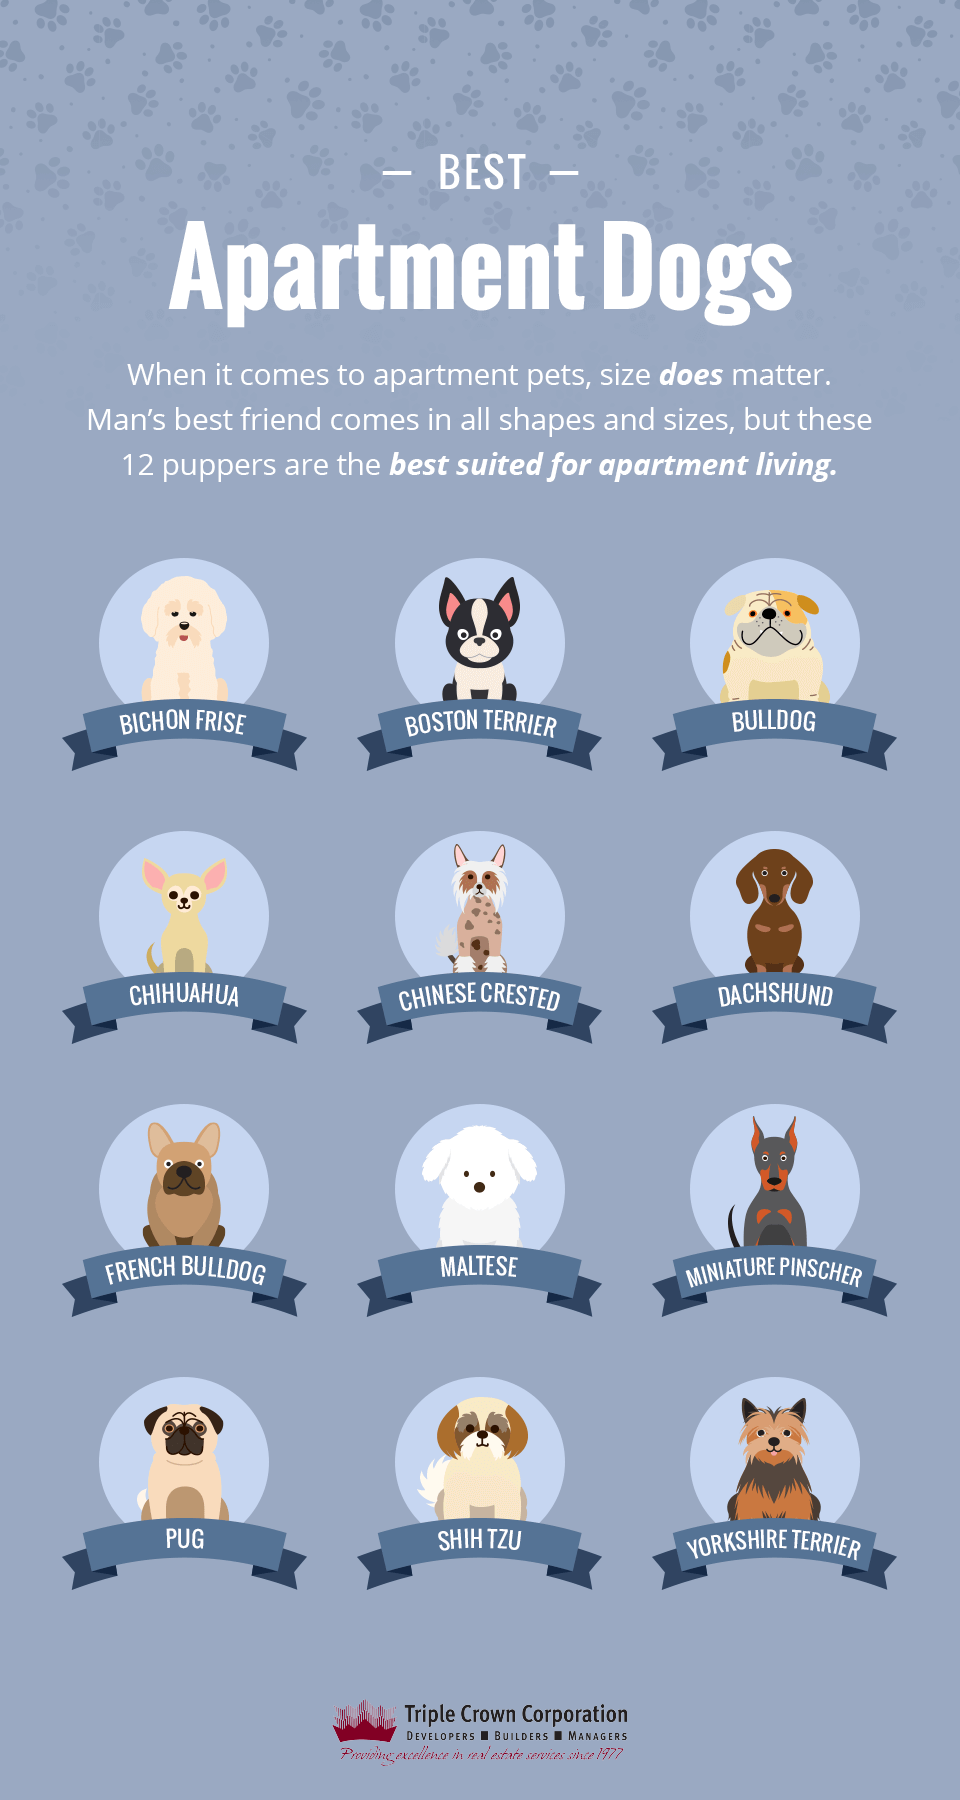 What kind of dog is better to have in an apartment